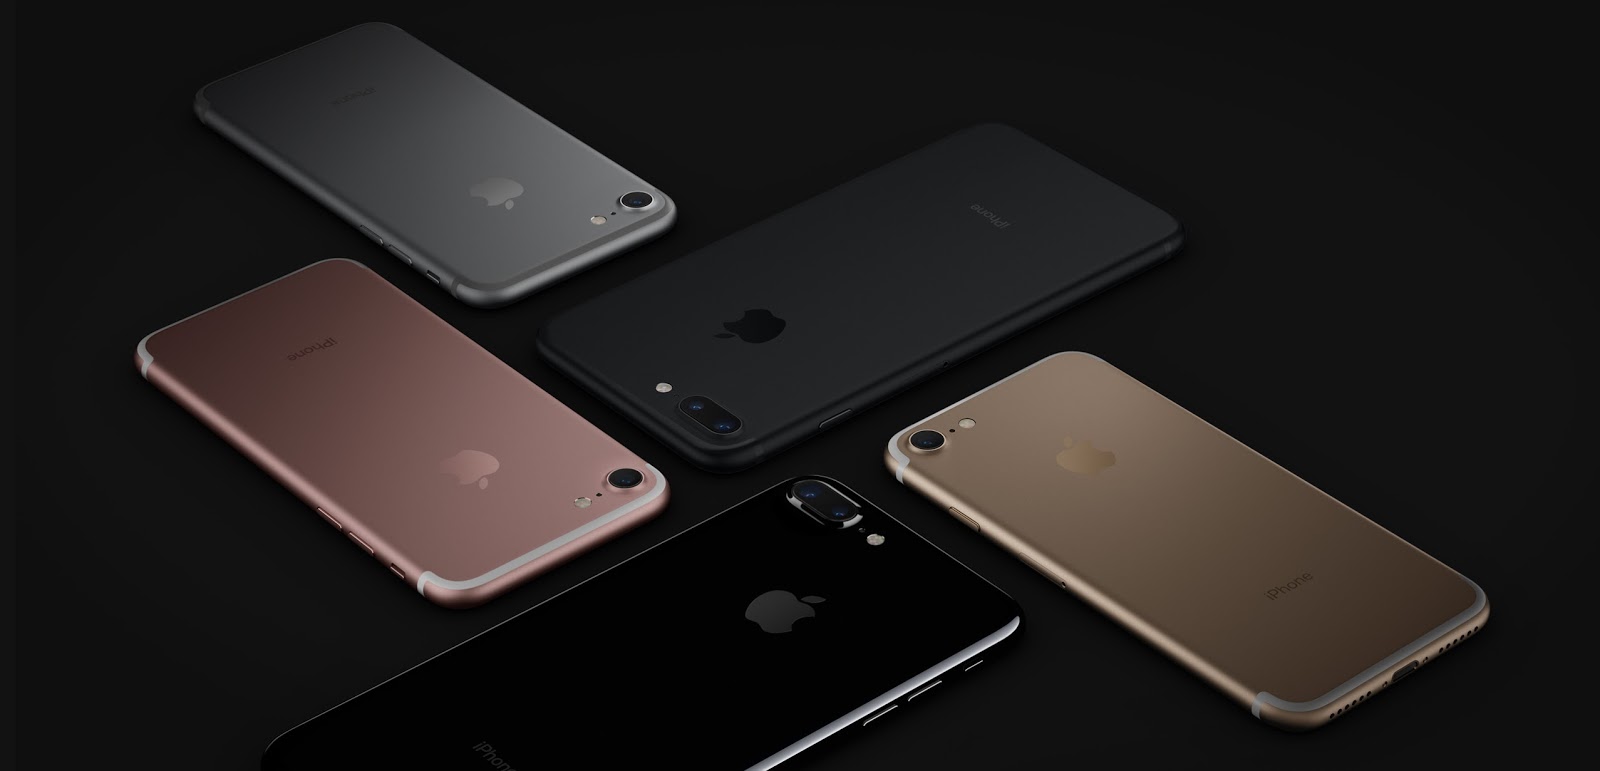 Iphone 7 Here Are 7 Reasons Why You Should Buy Apples Latest Flagship